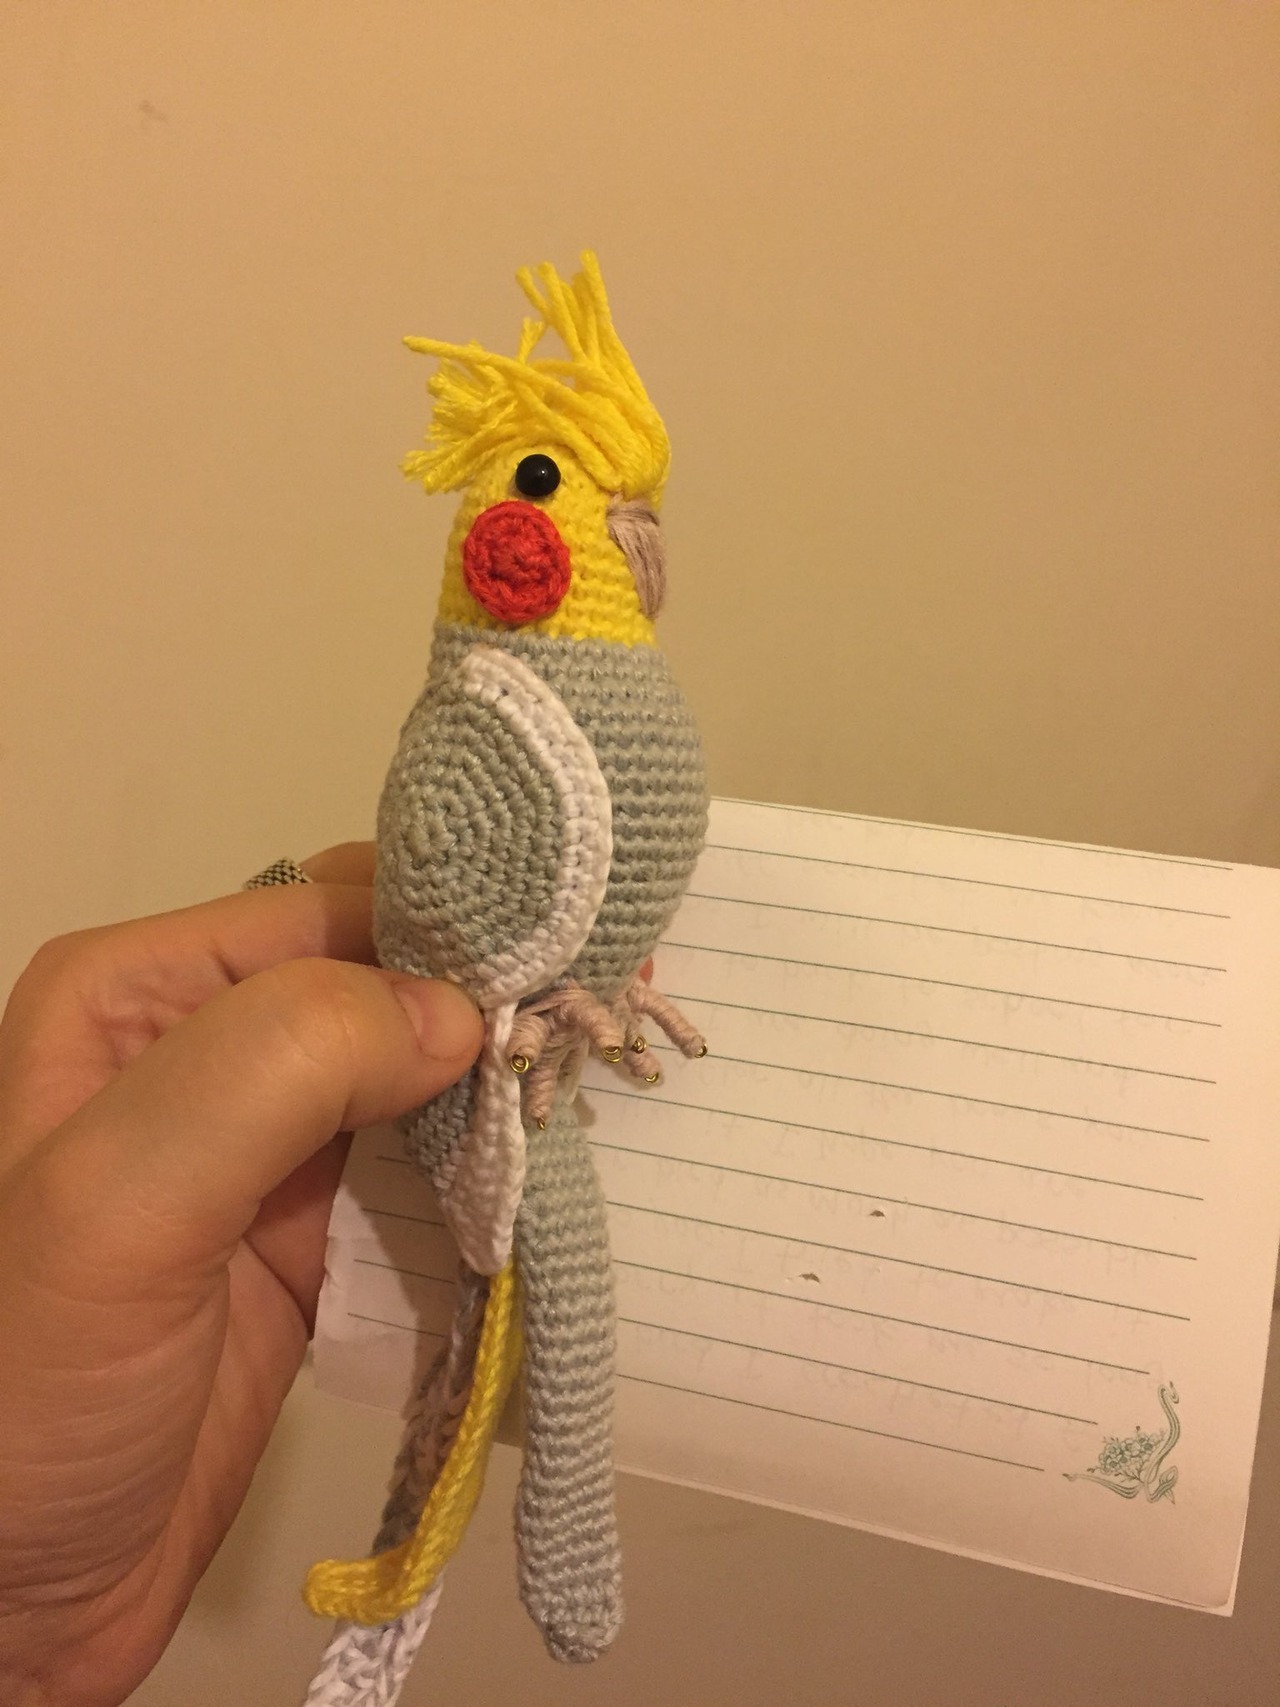 MY FRIEND CROCHETED ME A MINI-PRITCH AND IT’S PERFECT!!!!
she’s doing commissions so if you’re interested, inbox me!